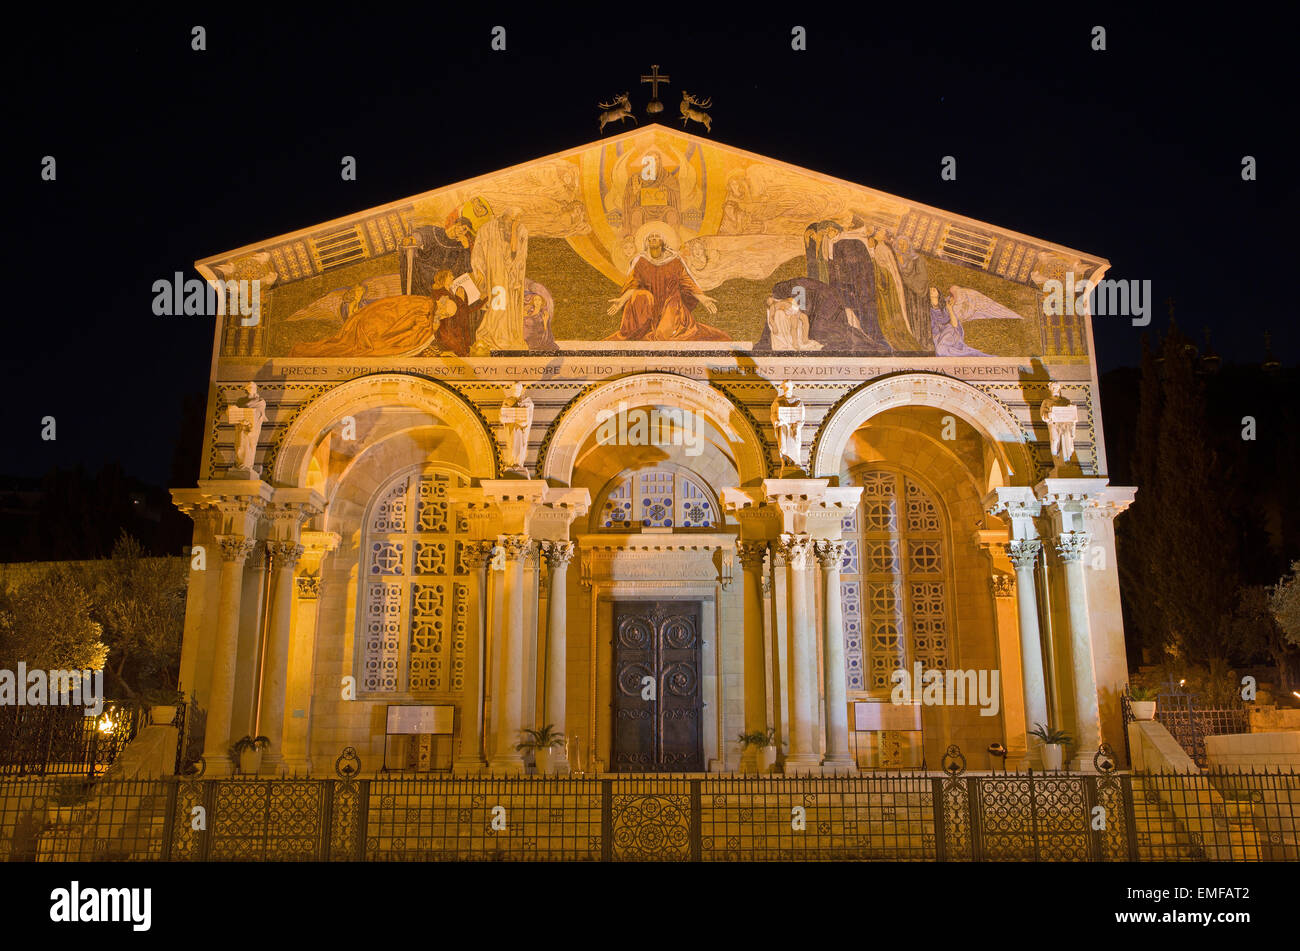 JERUSALEM, ISRAEL - MARCH 3, 2015:  The Church of All Nations (Basilica of the Agony) Stock Photo